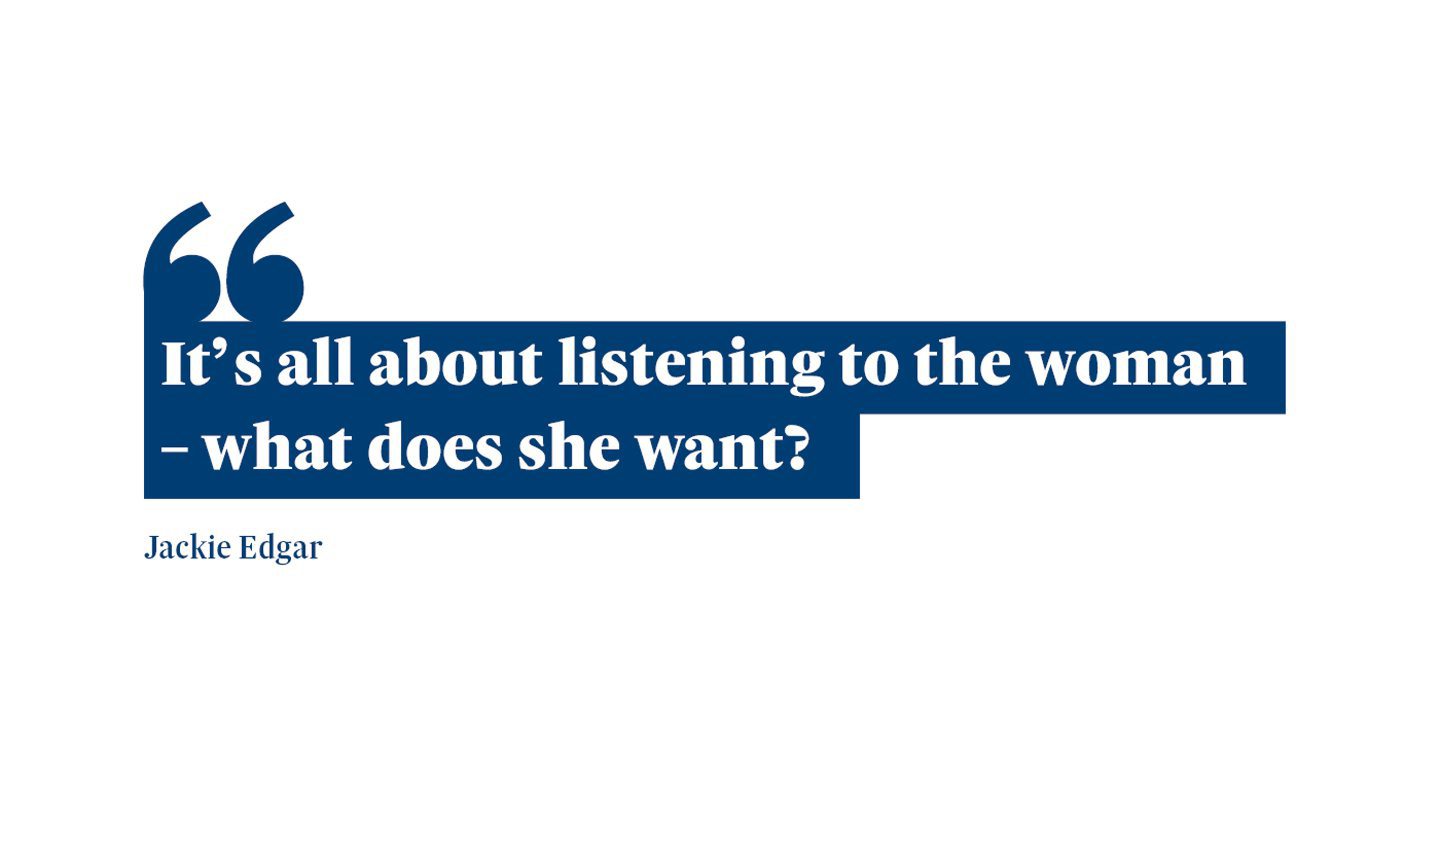 A quote from Jackie Edgar that says: “It’s all about listening to the woman – what does she want?"